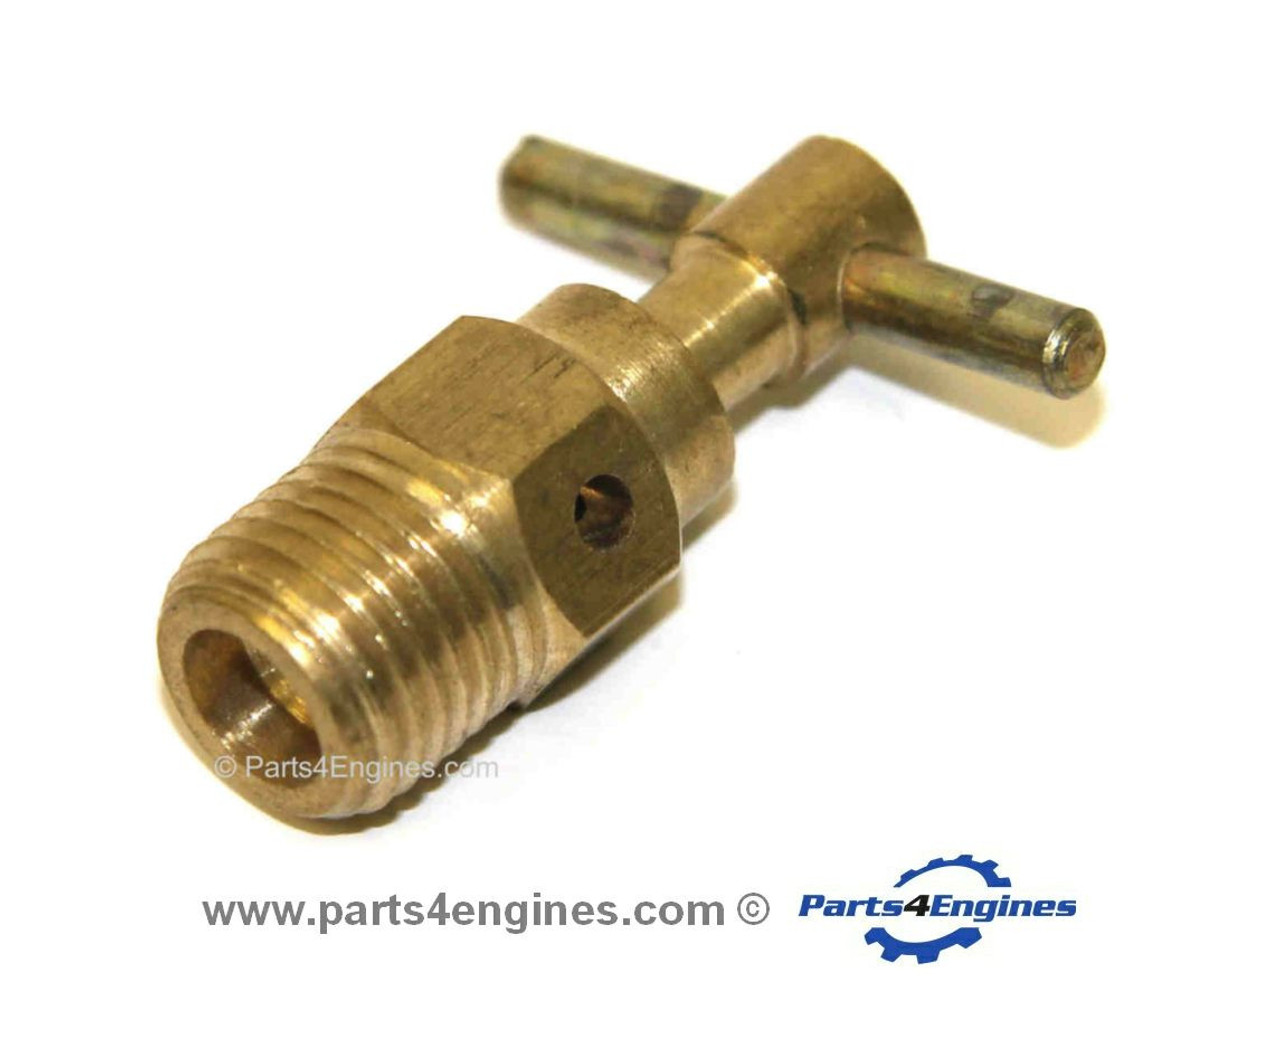 Perkins 4.203 Drain Tap from parts4engines.com